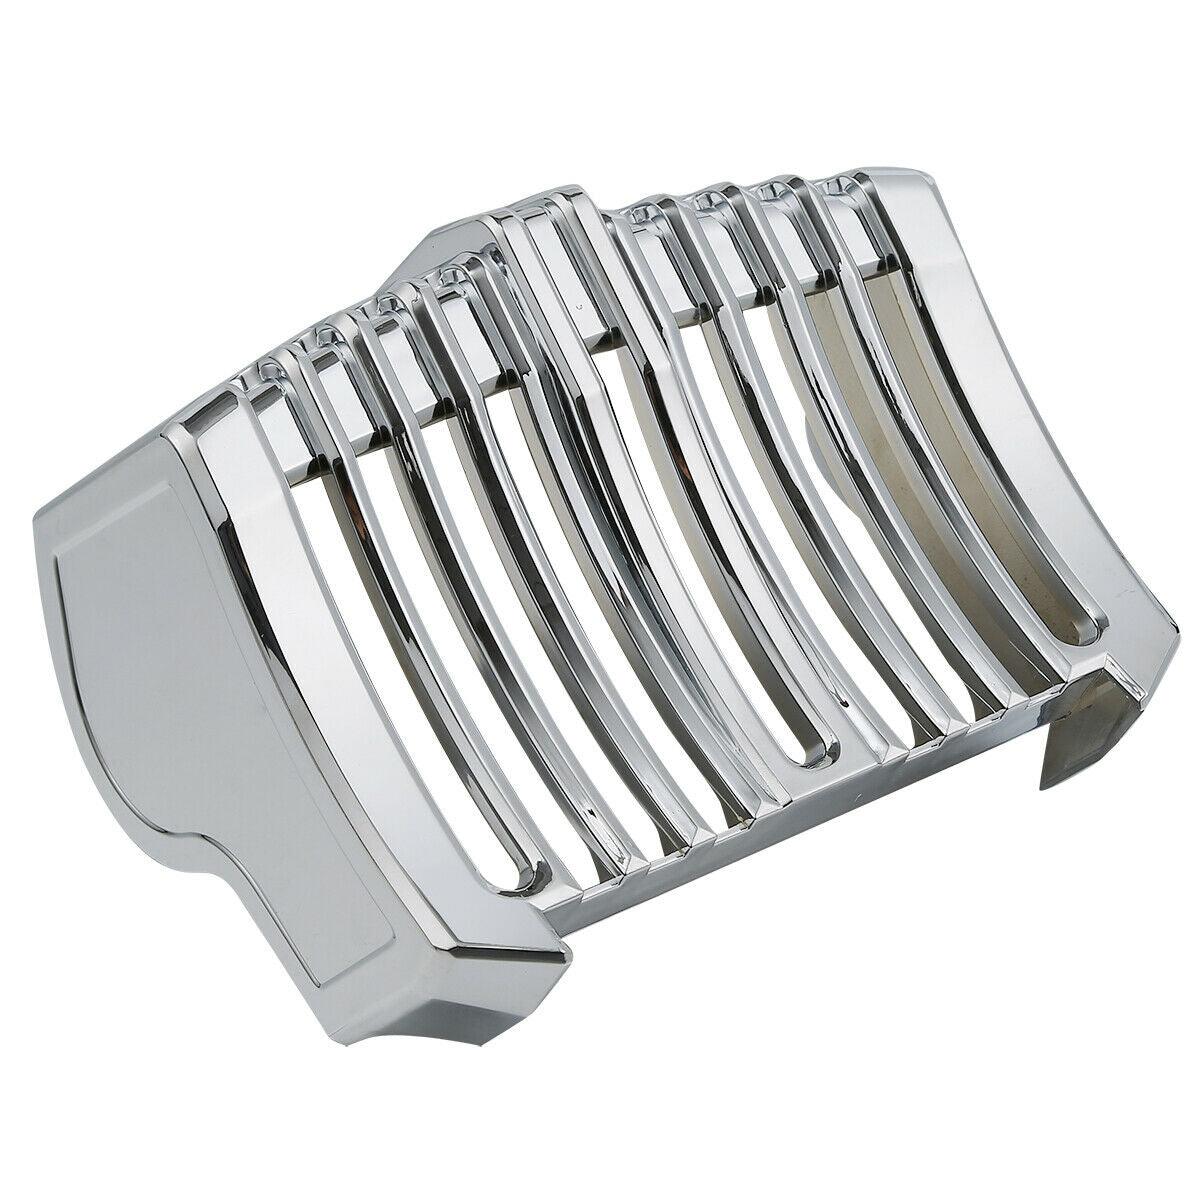 Chrome Oil Cooler Cover For Harley Touring Road King Street Electra Glide 17-20 - Moto Life Products